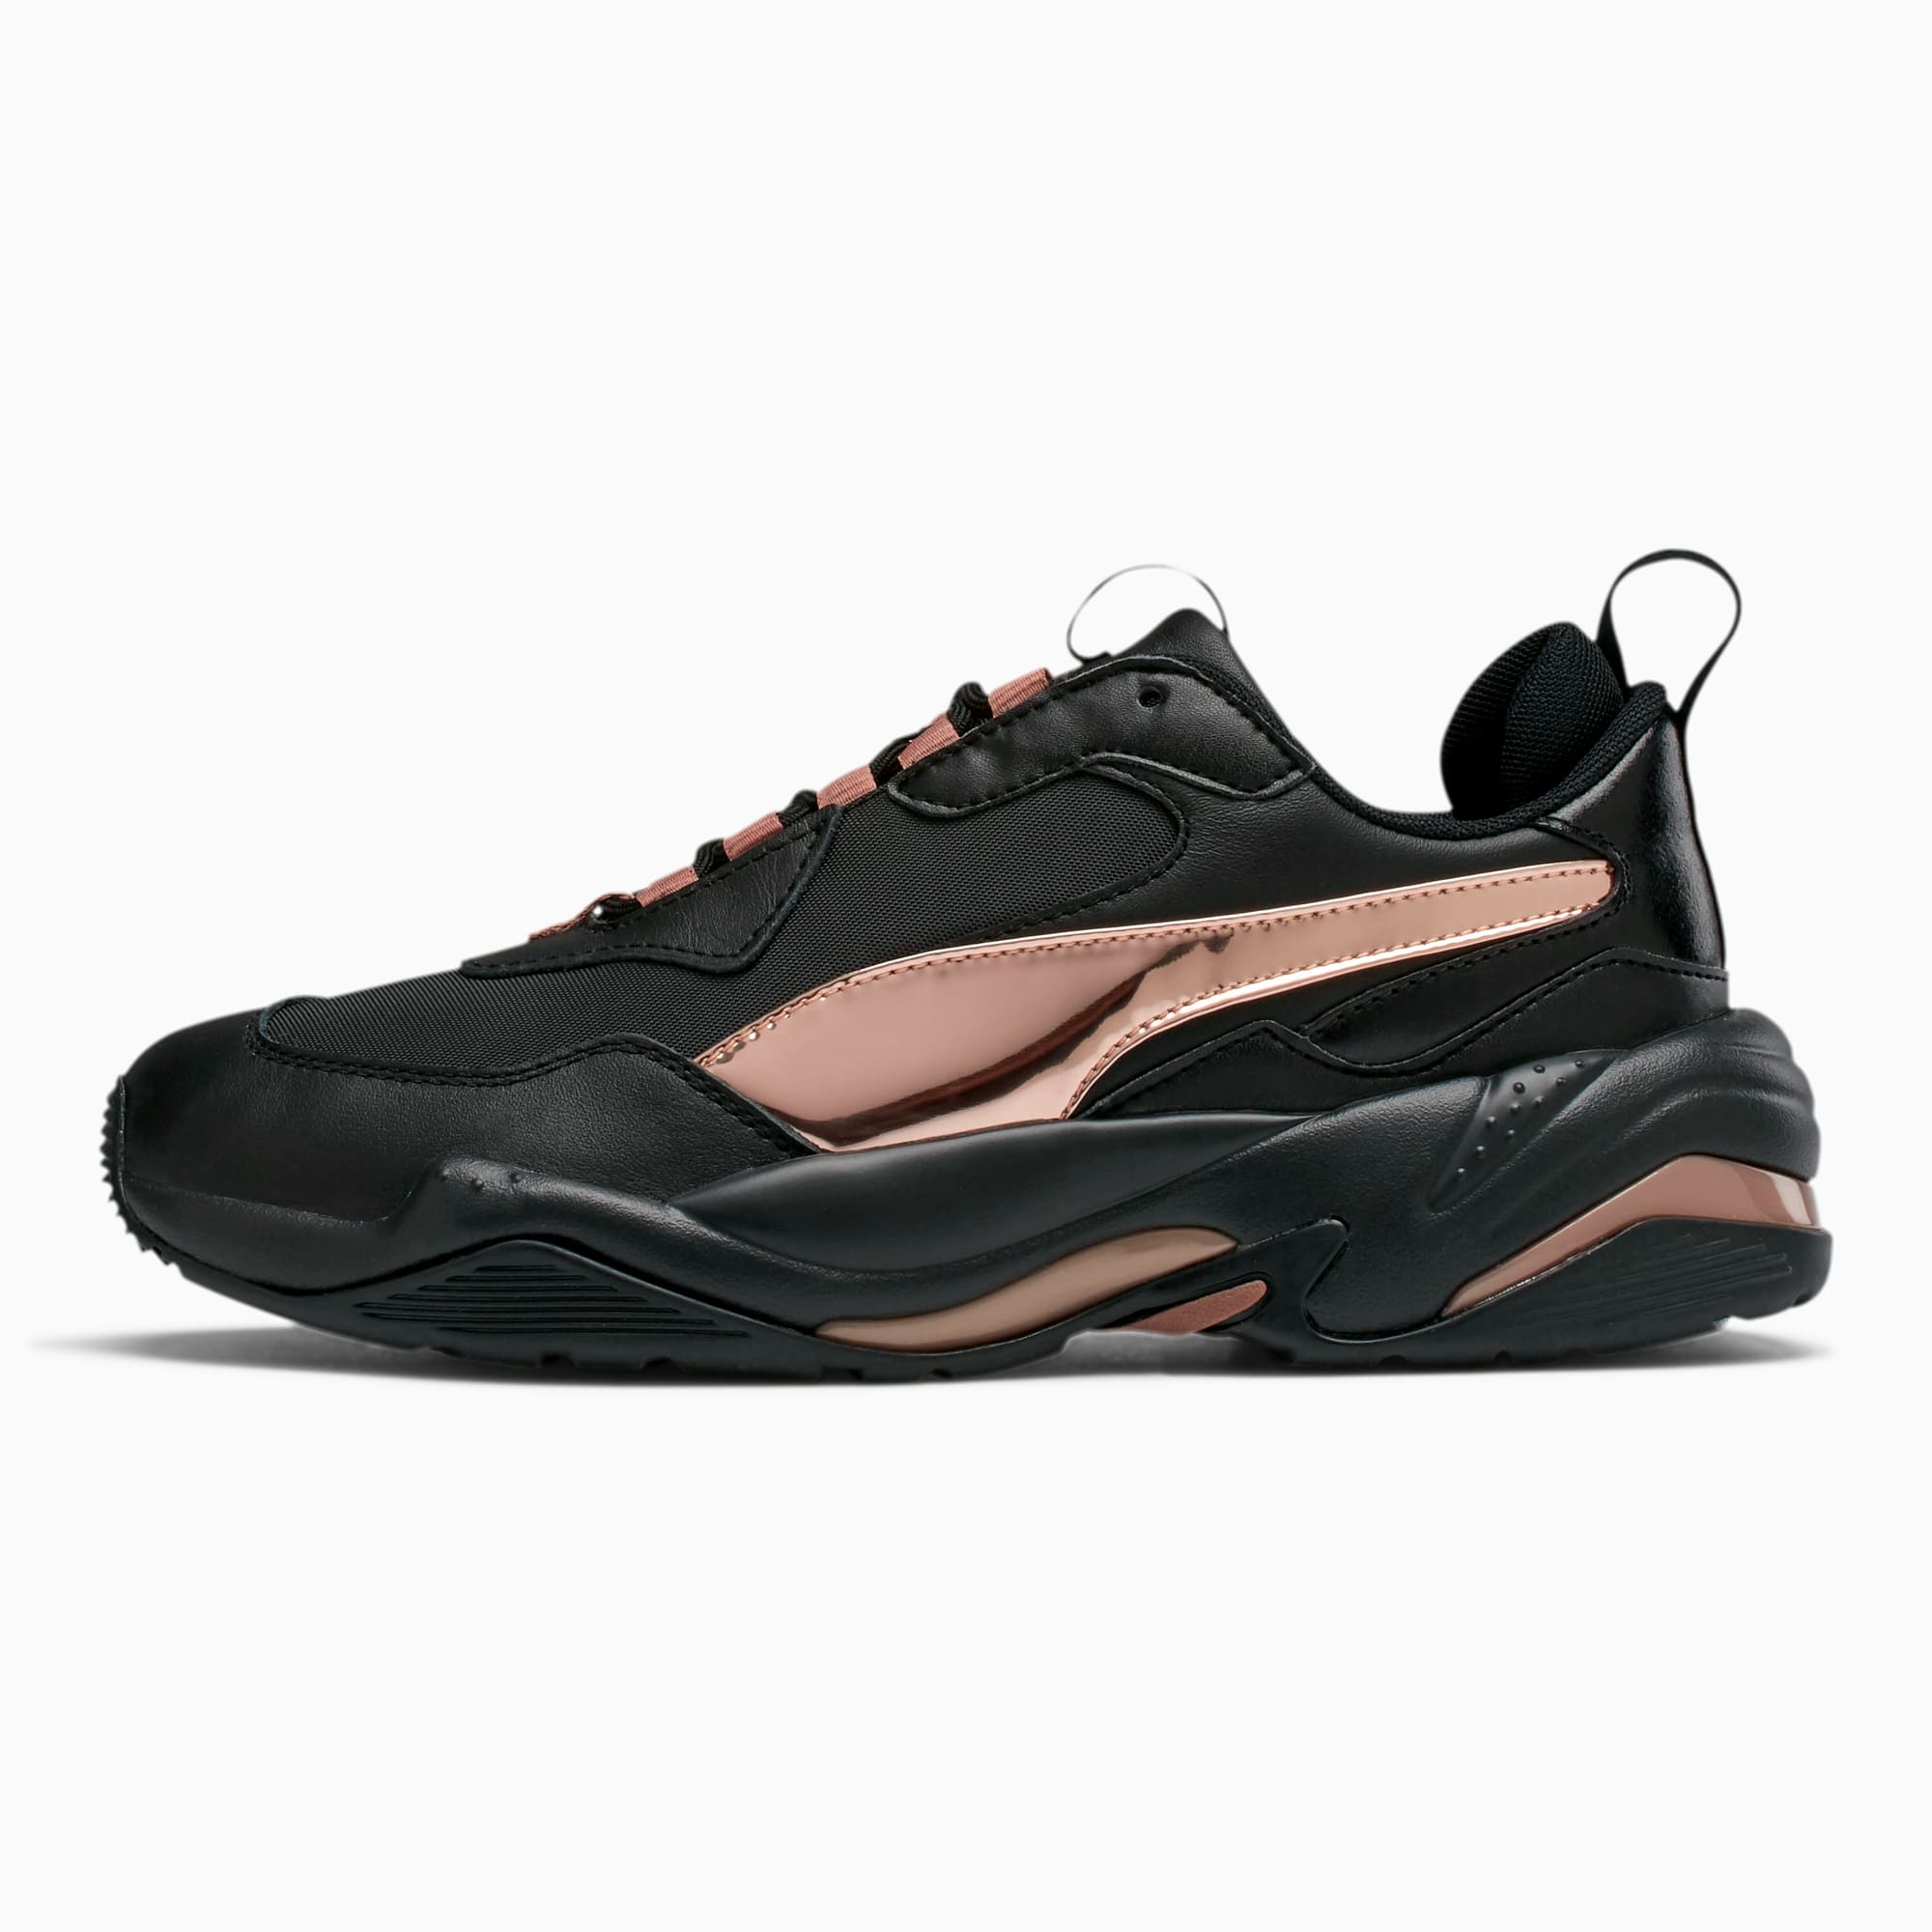 Thunder Electric Women's Sneakers | PUMA US